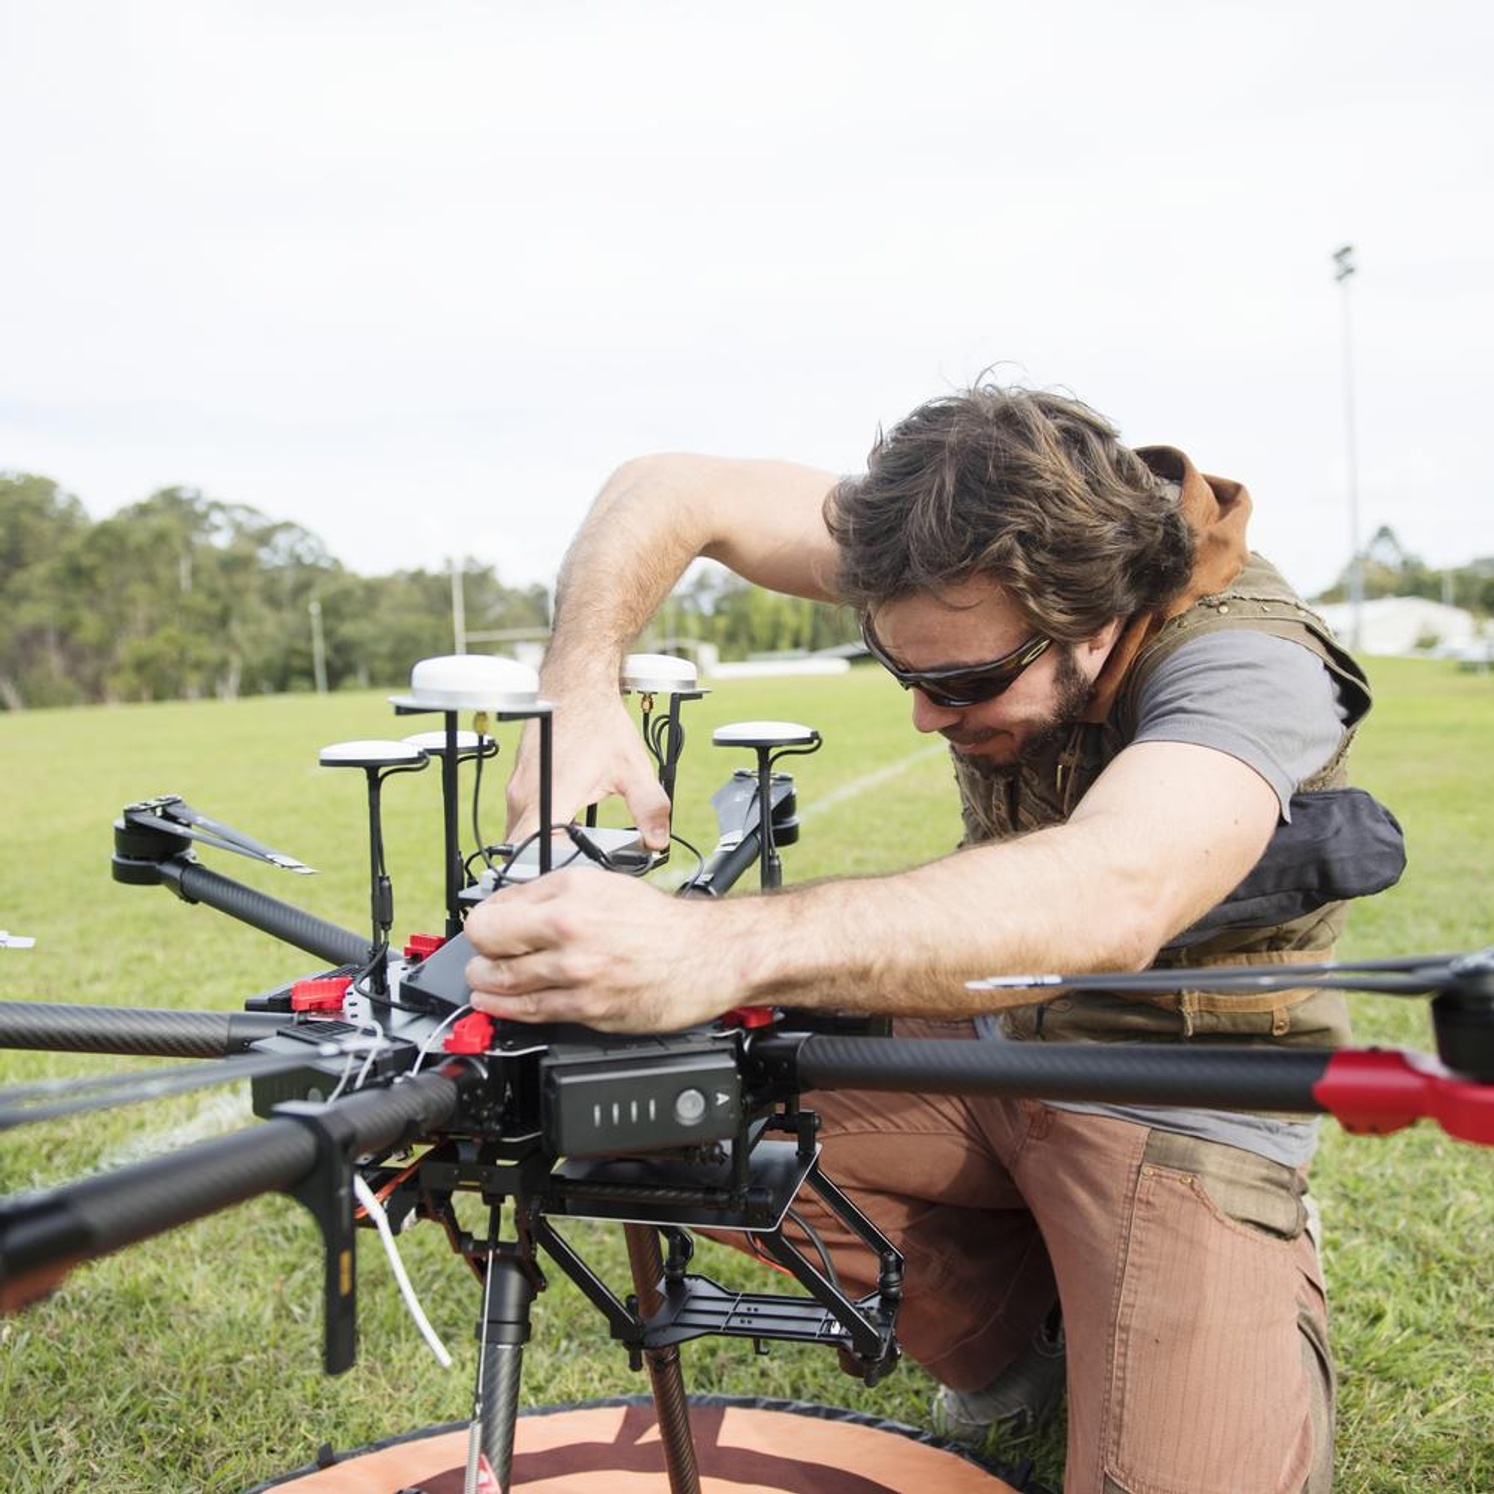 A researcher working on a drone on a green lawn